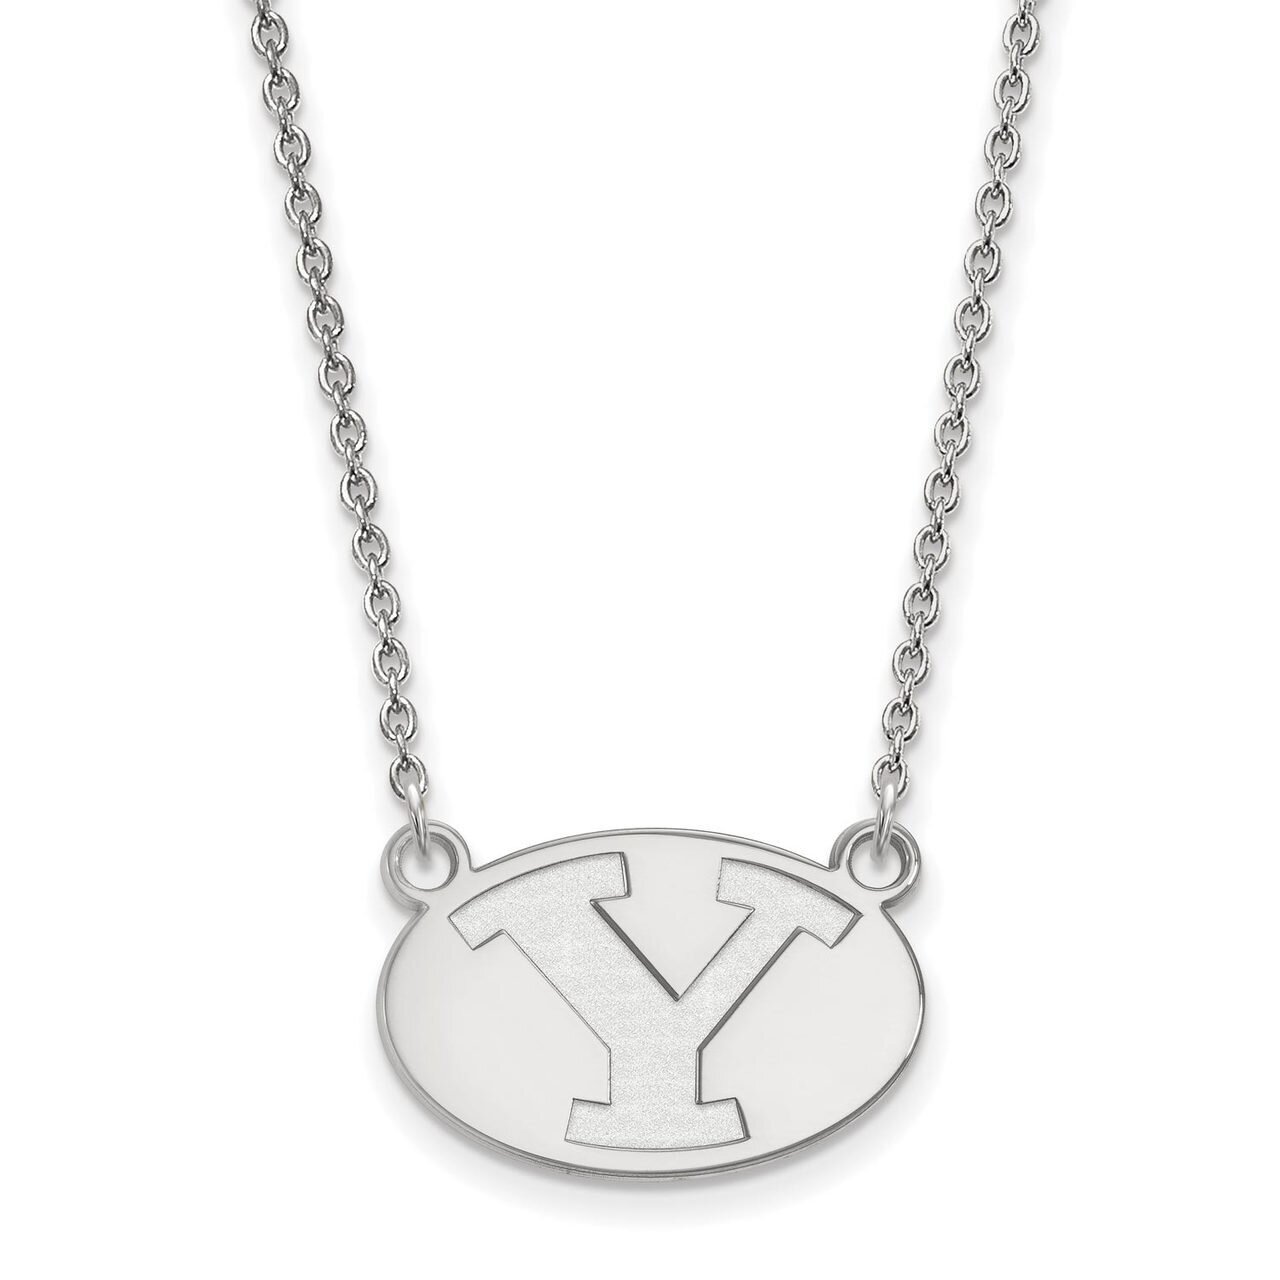 Brigham Young University Small Pendant with Chain Necklace Sterling Silver SS009BYU-18